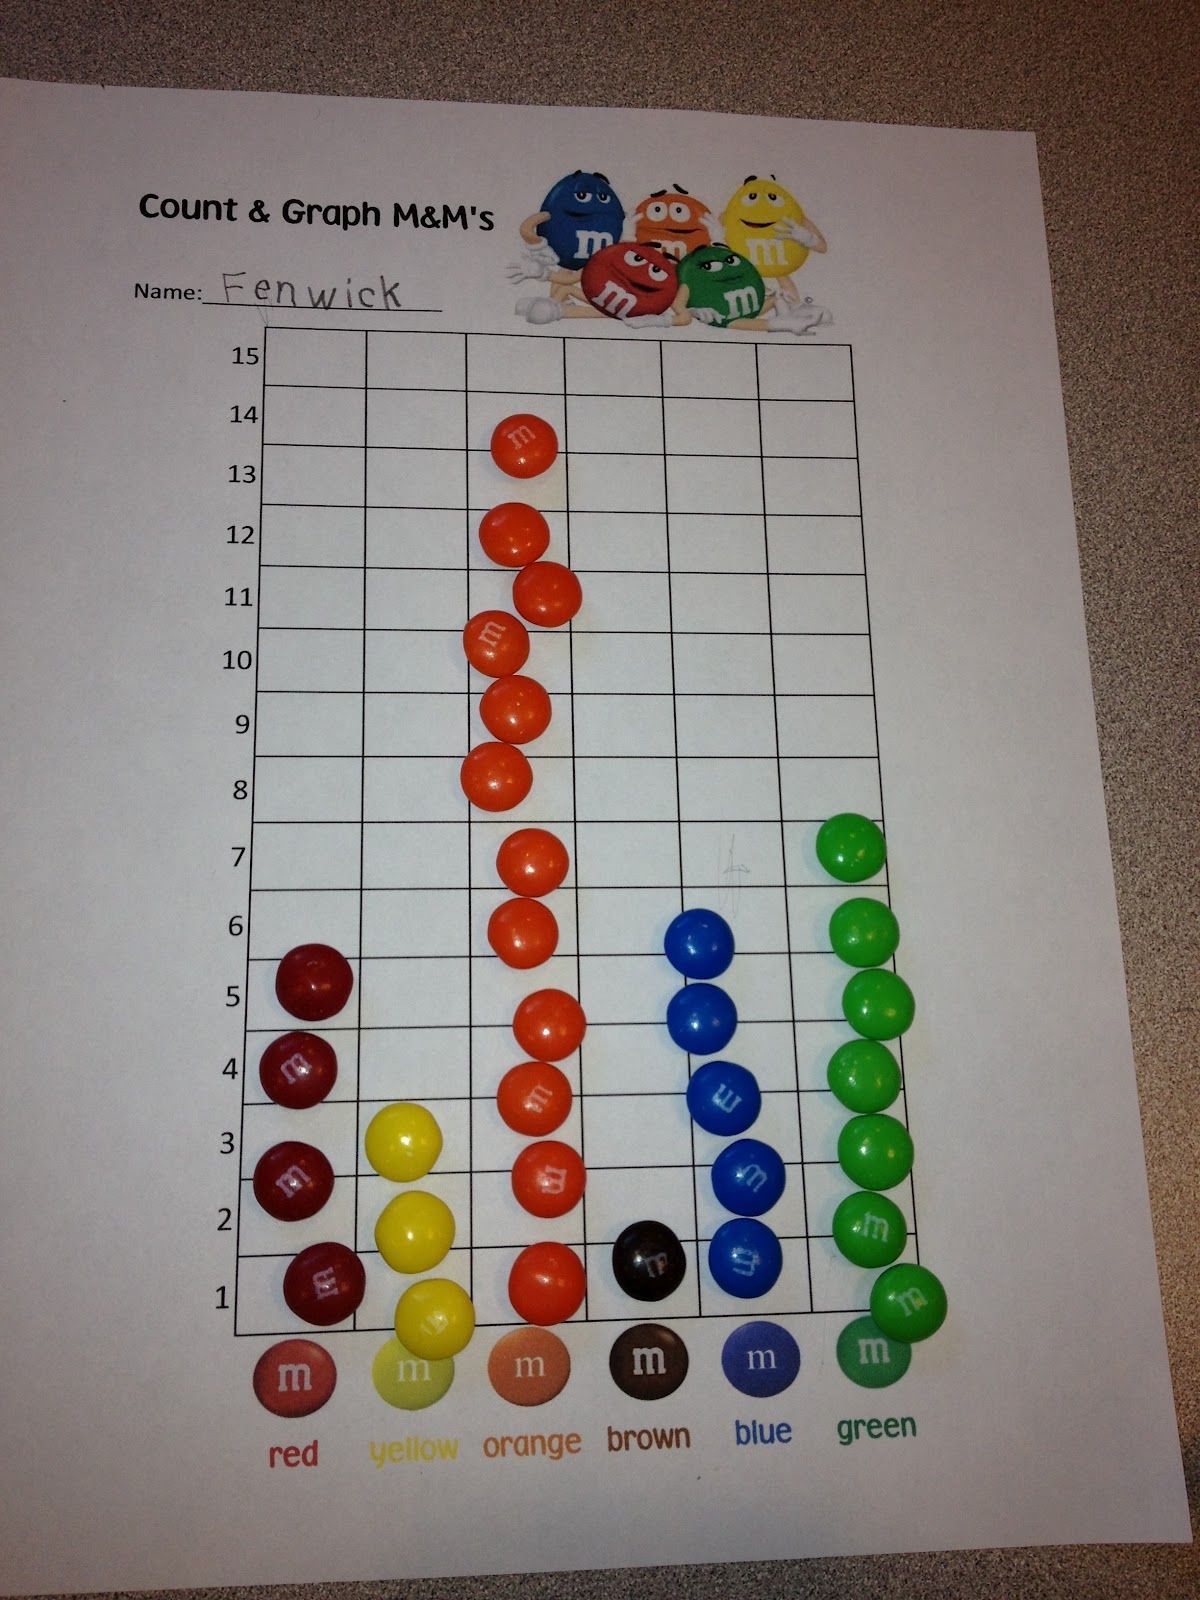 Could use these for beads. Kids could pick on bead at a time and sort while creating a bar graph. Could make a few graphs on card stock and